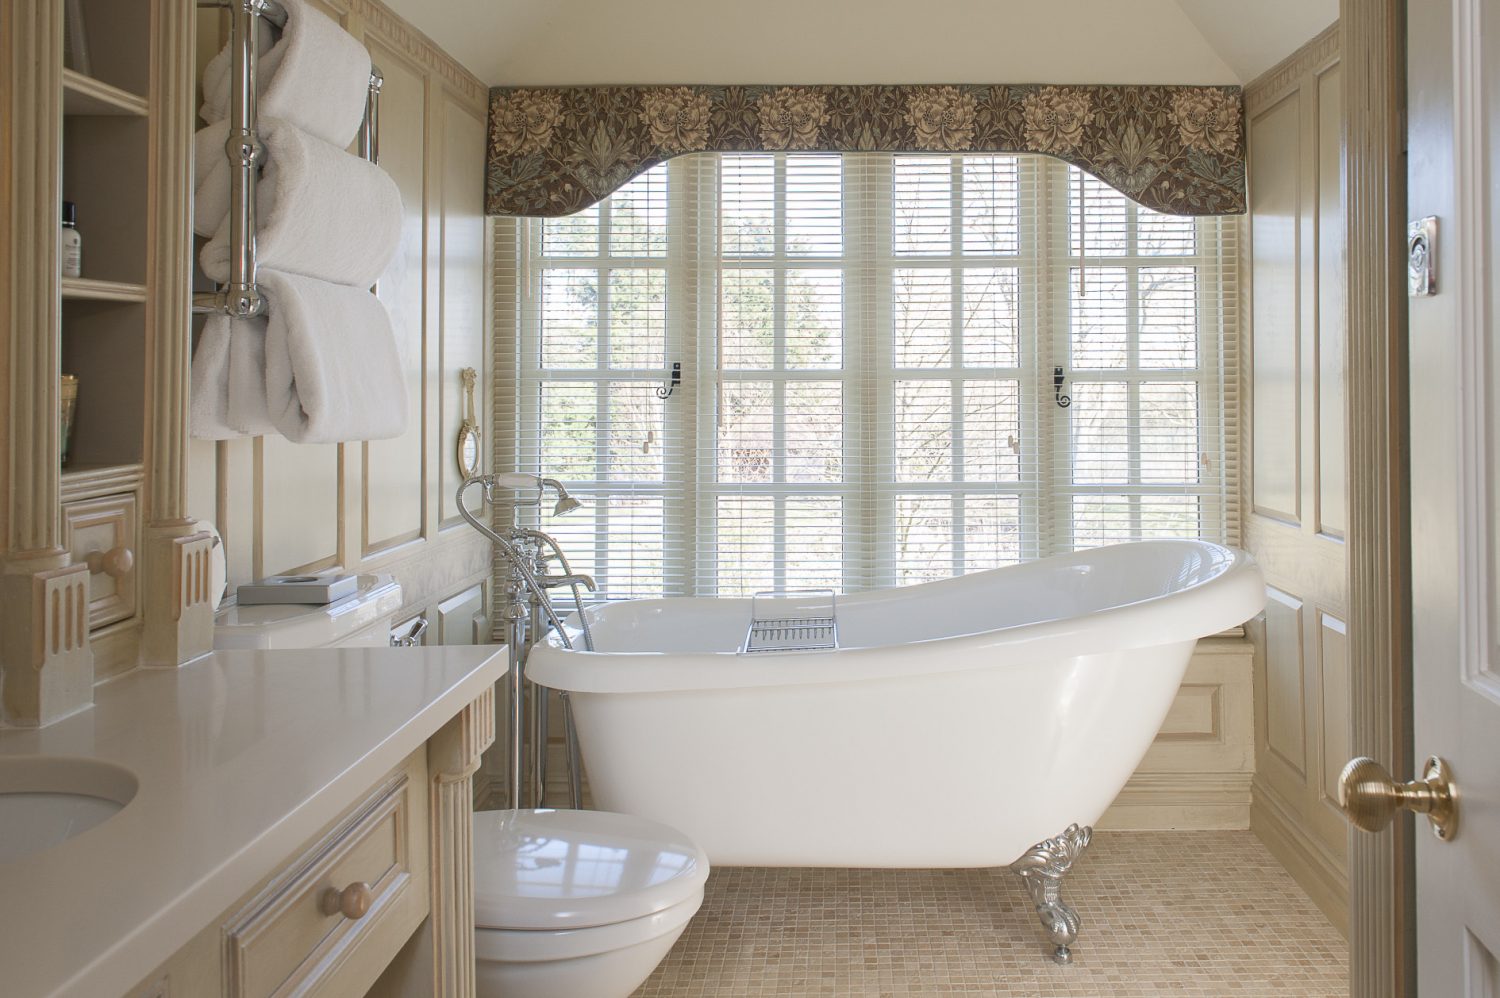 Sackville’s en suite has been beautifully hand-painted by Nina, taking four months to complete. A decadent slipper bath is an ideal spot to take in the stunning views of the surrounding countryside